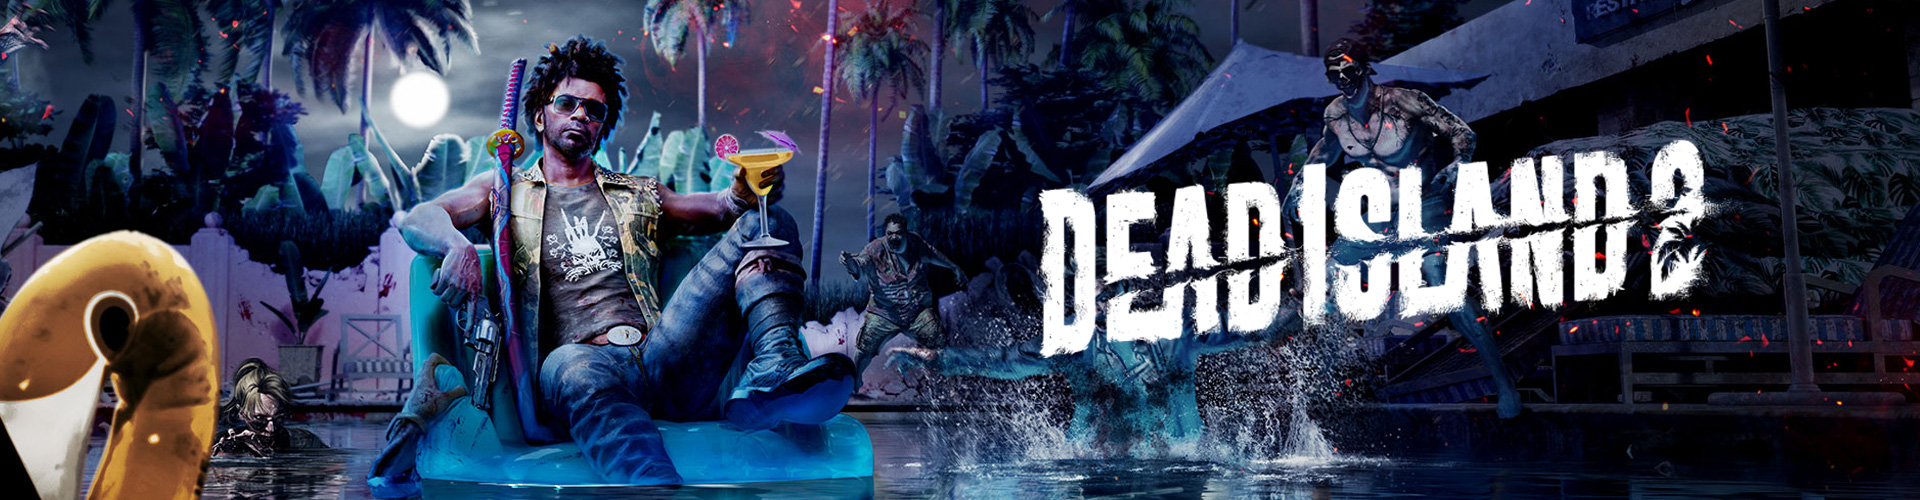 Dead Island 2: a multiplayer horror game against zombies